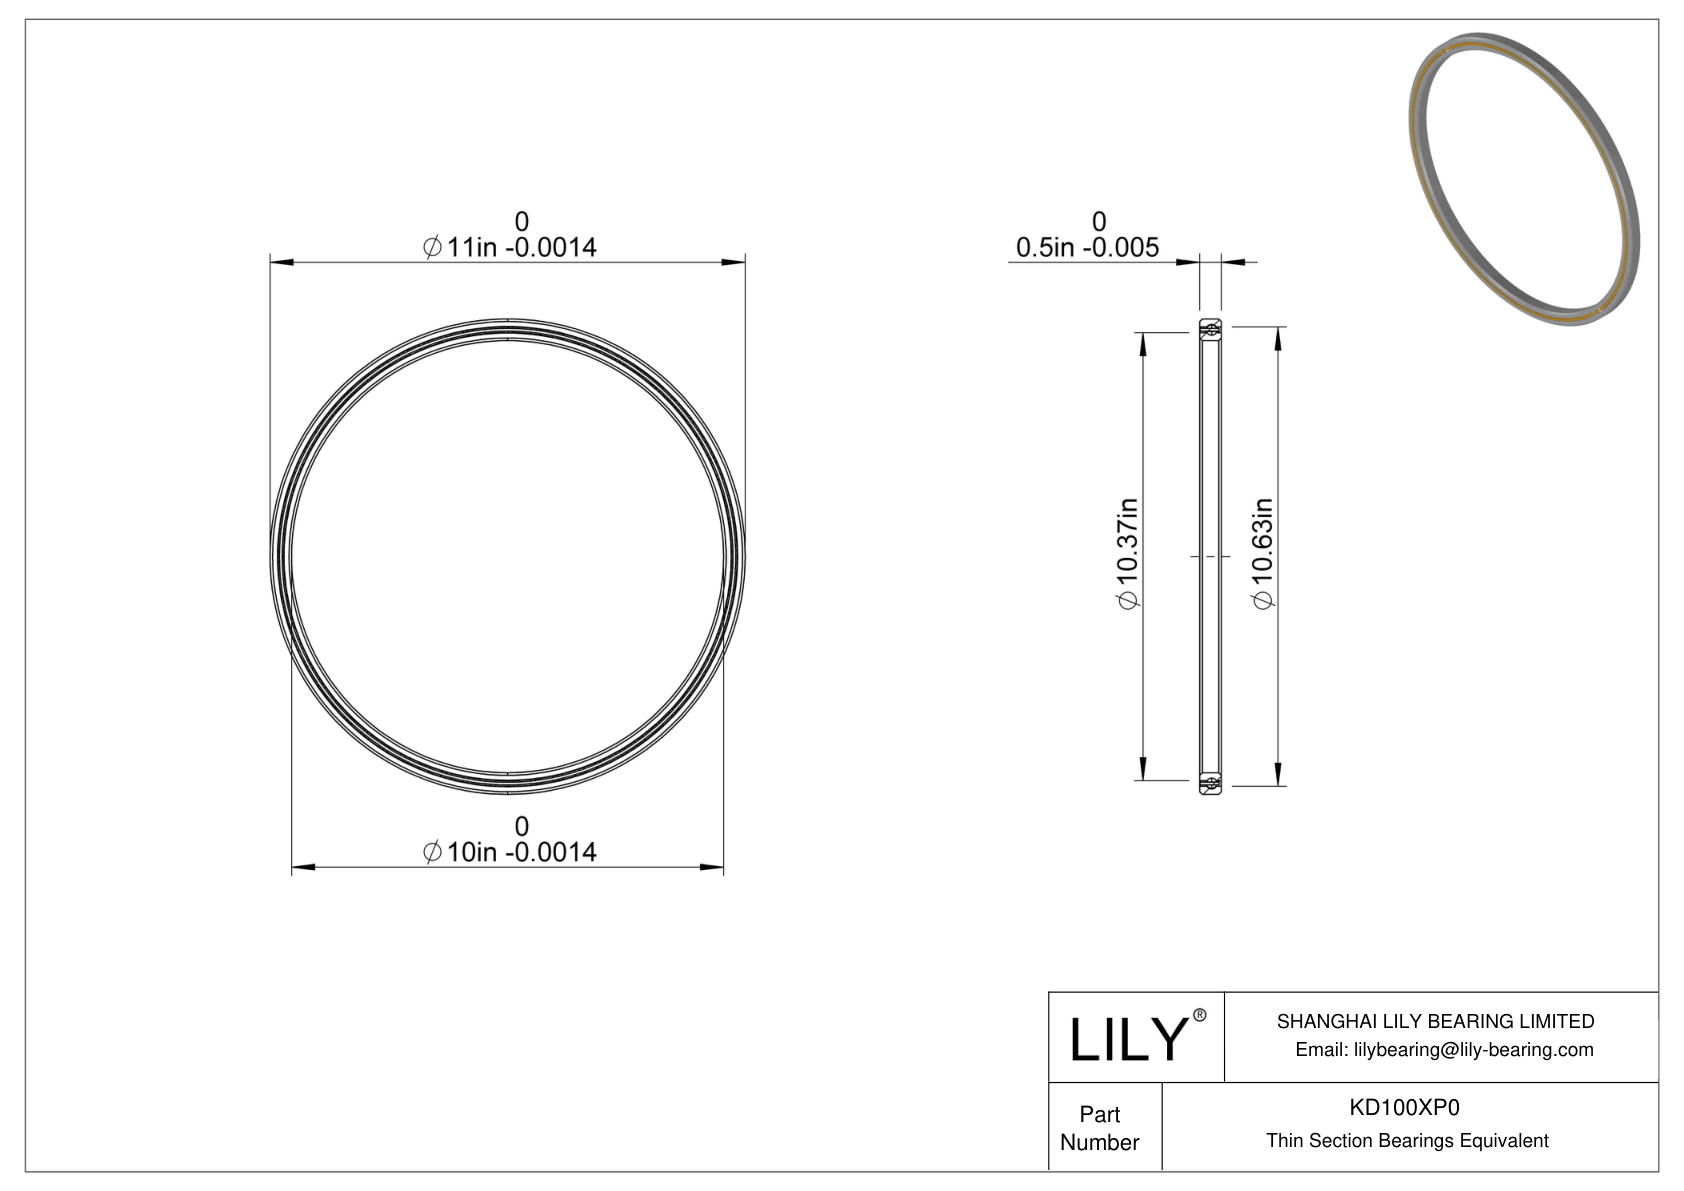 KD100XP0 Constant Section (CS) Bearings cad drawing